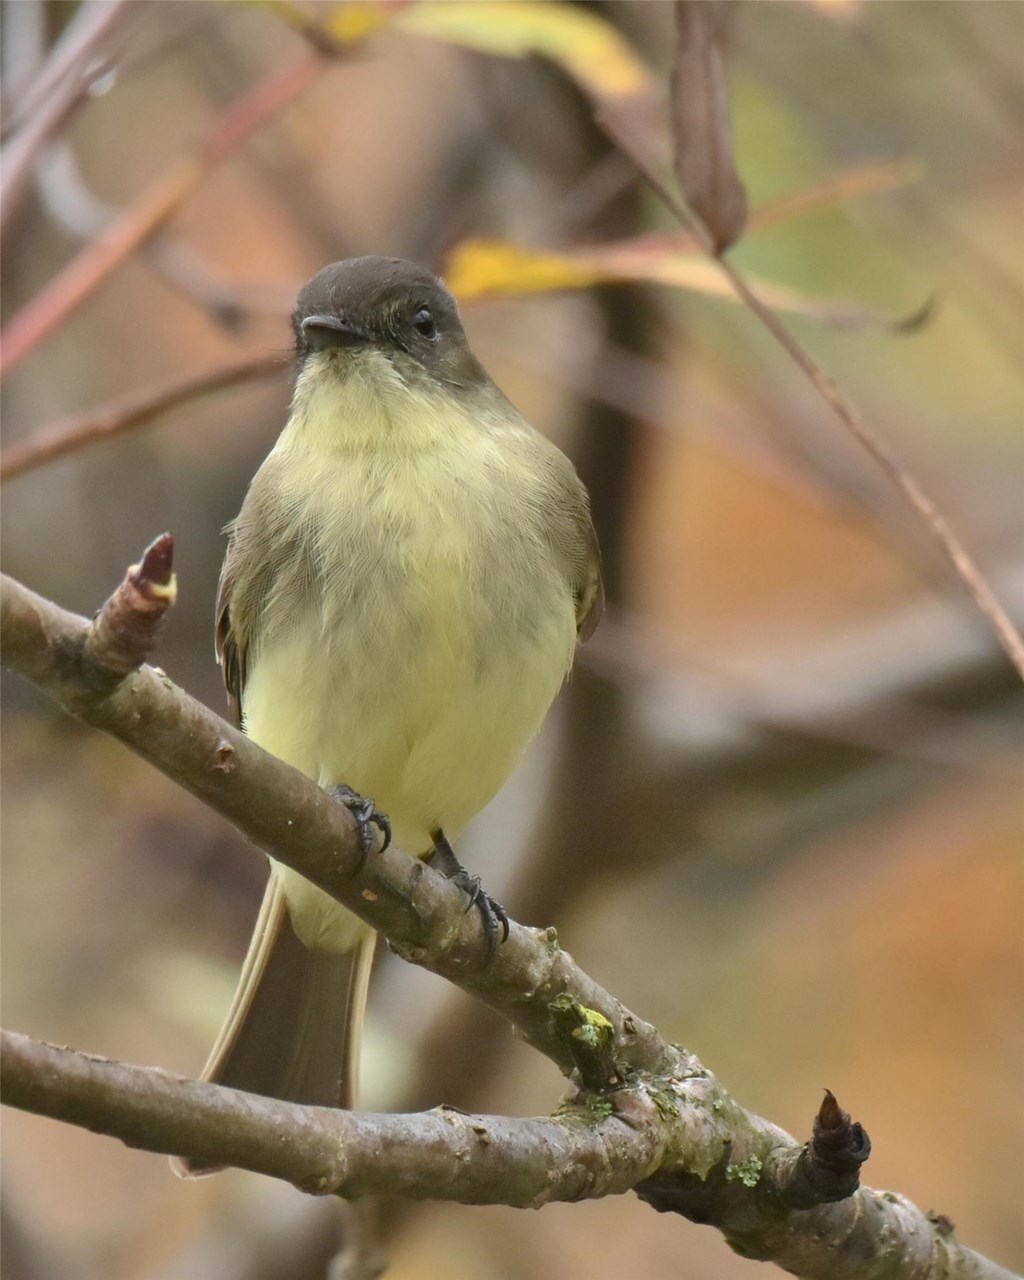 An Eastern Phoebe perched on a branch